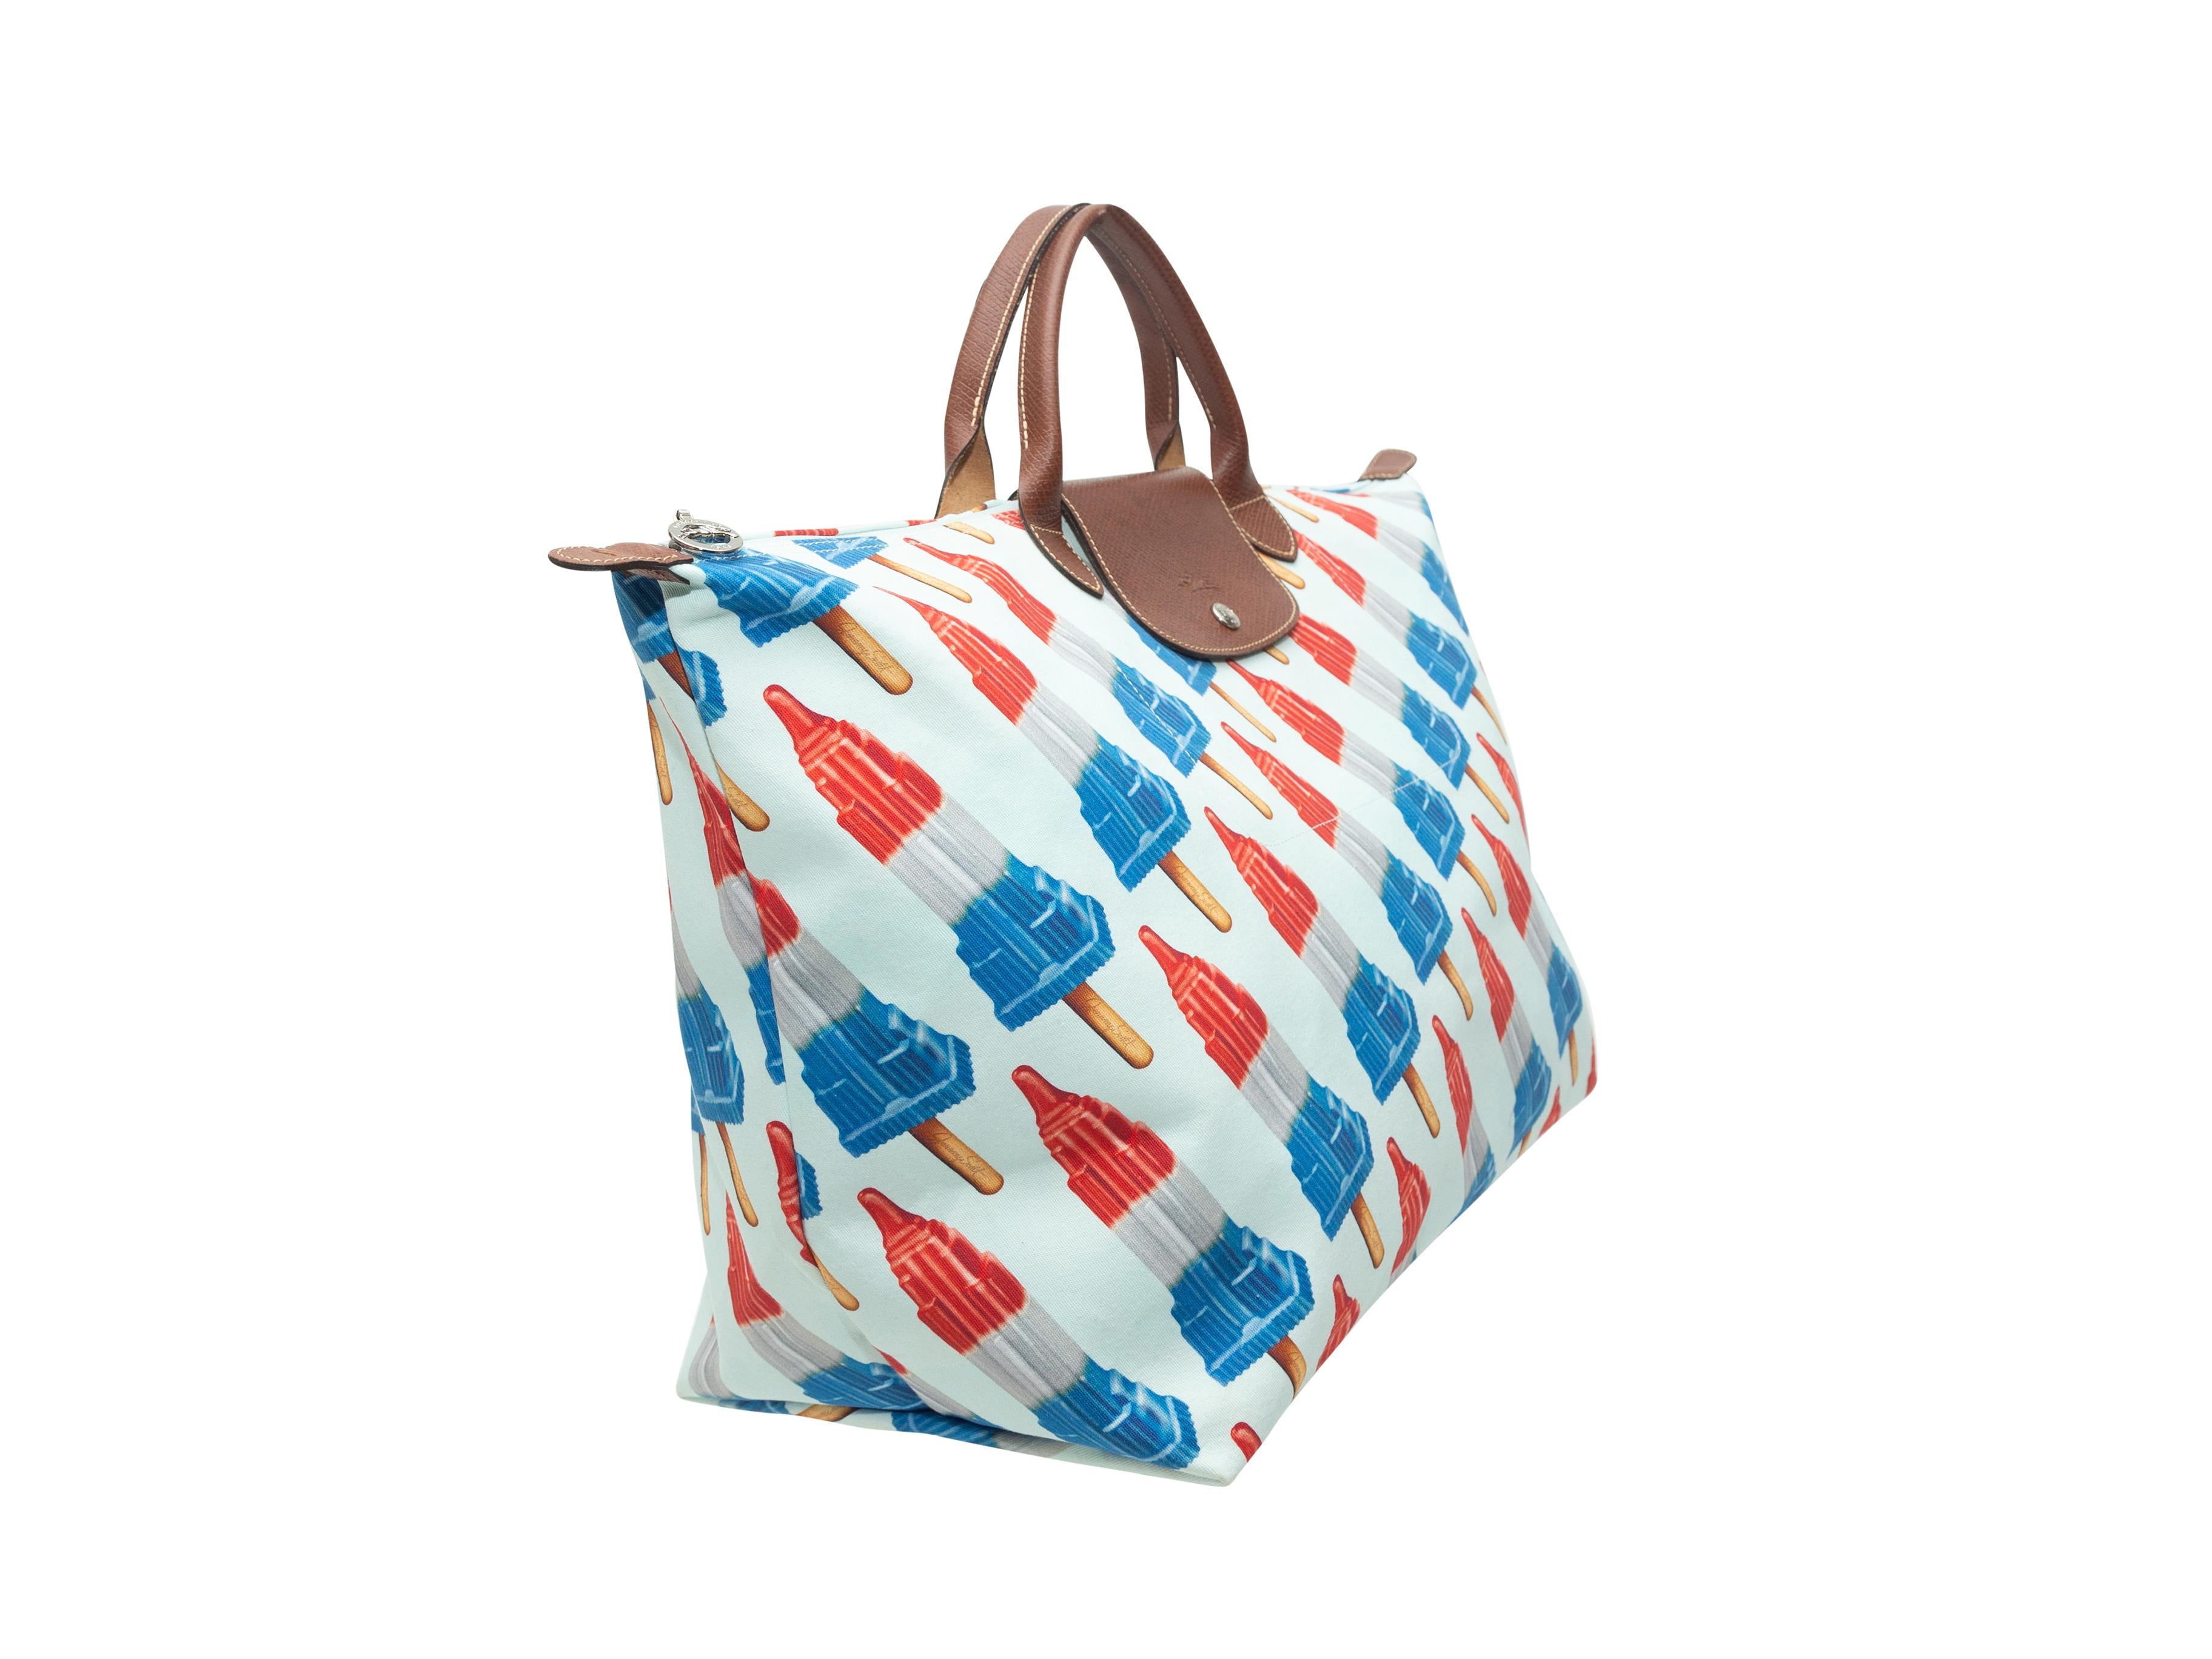 Product details: White and multicolor Empire State Building popsicle print tote bag by Jeremy Scott x Longchamp. Brown leather handles. Zip closure at top. 17